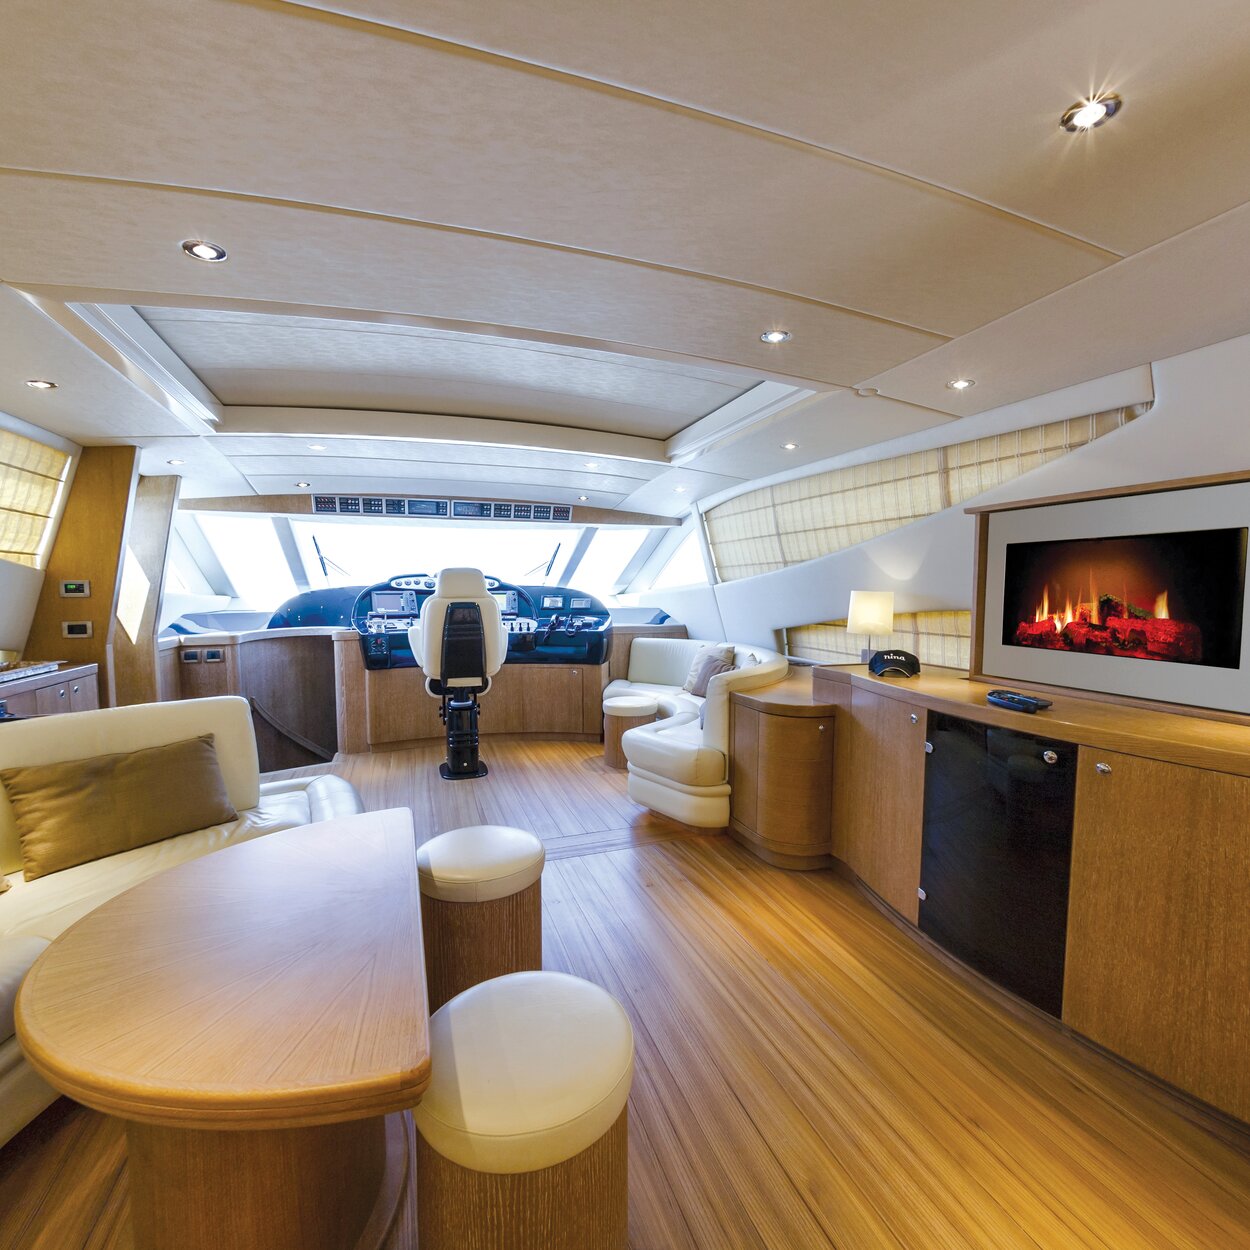 Opti-V-Single electric fire installed in a yacht with wooden floor and white walls.